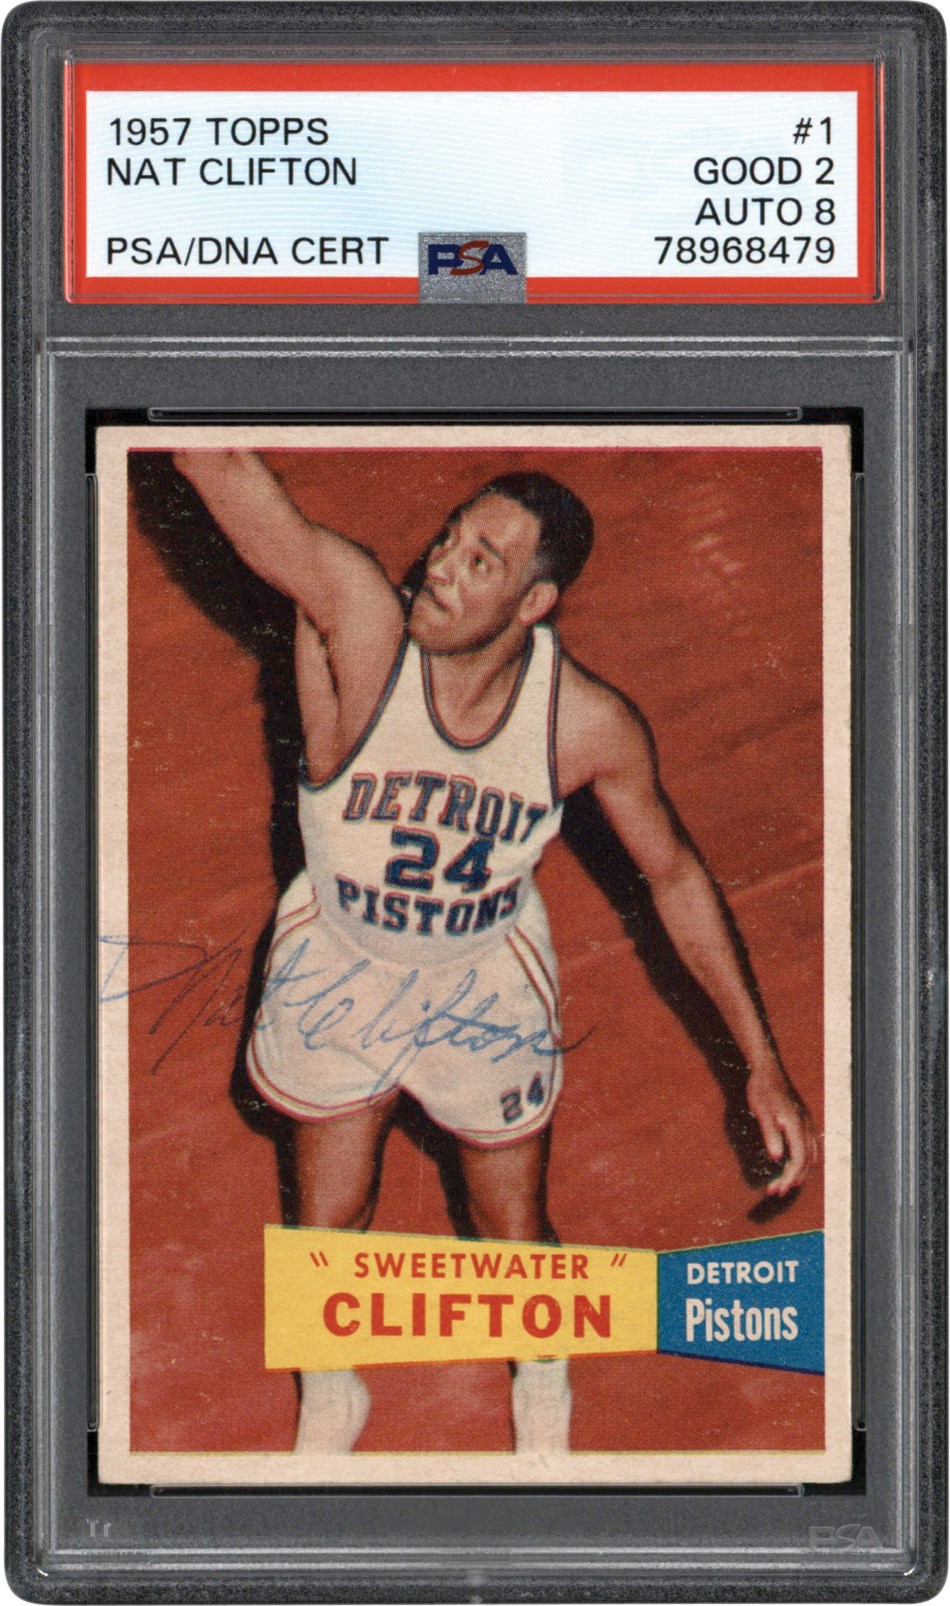 - 1957 Topps Basketball #1 Nat "Sweetwater" Clifton Signed Card PSA GD 2 Auto 8 (Only Dual-Graded PSA Example)